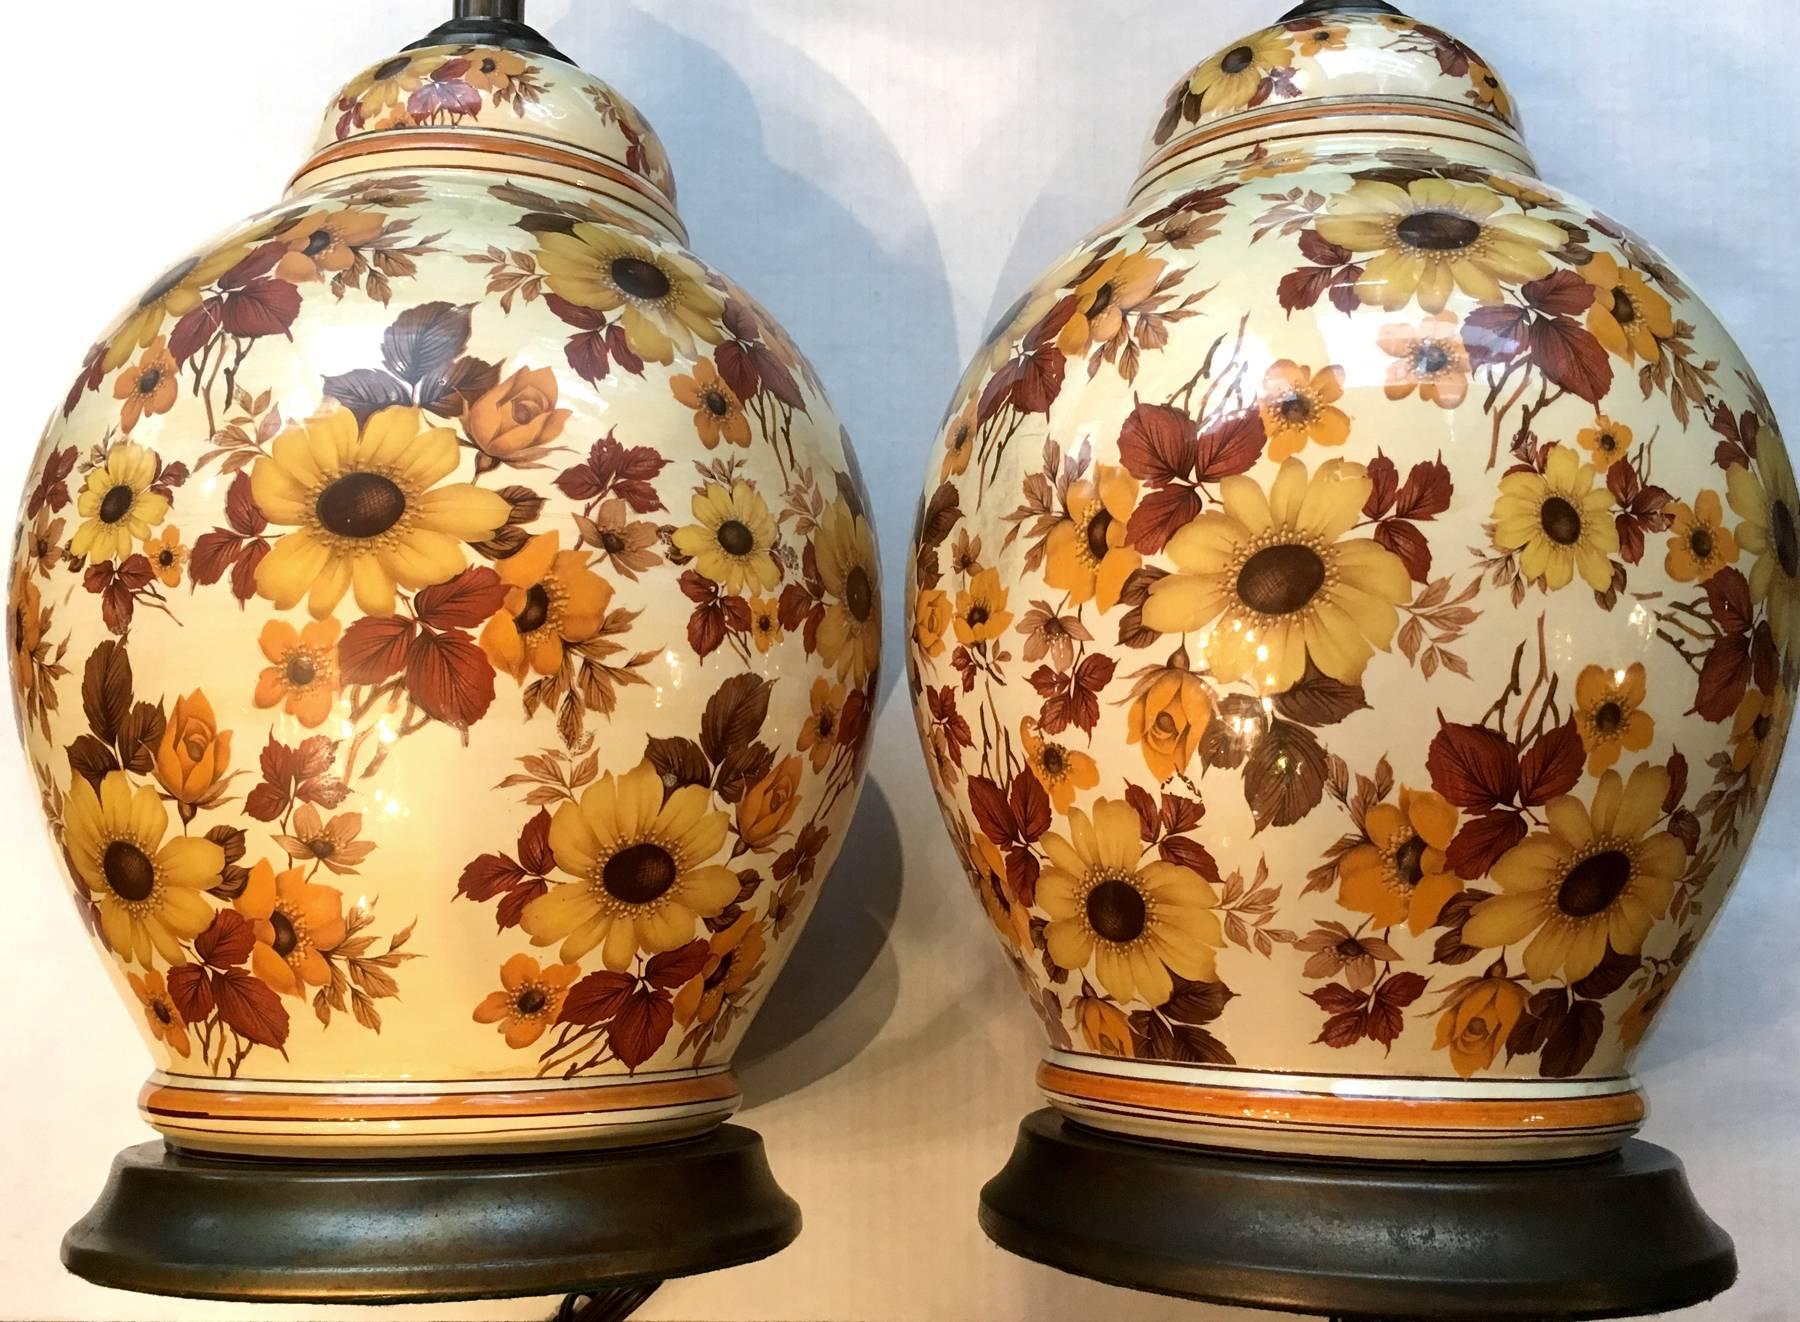 Pair of Italian porcelain lamps with floral decoration on body and with metal bases.
18